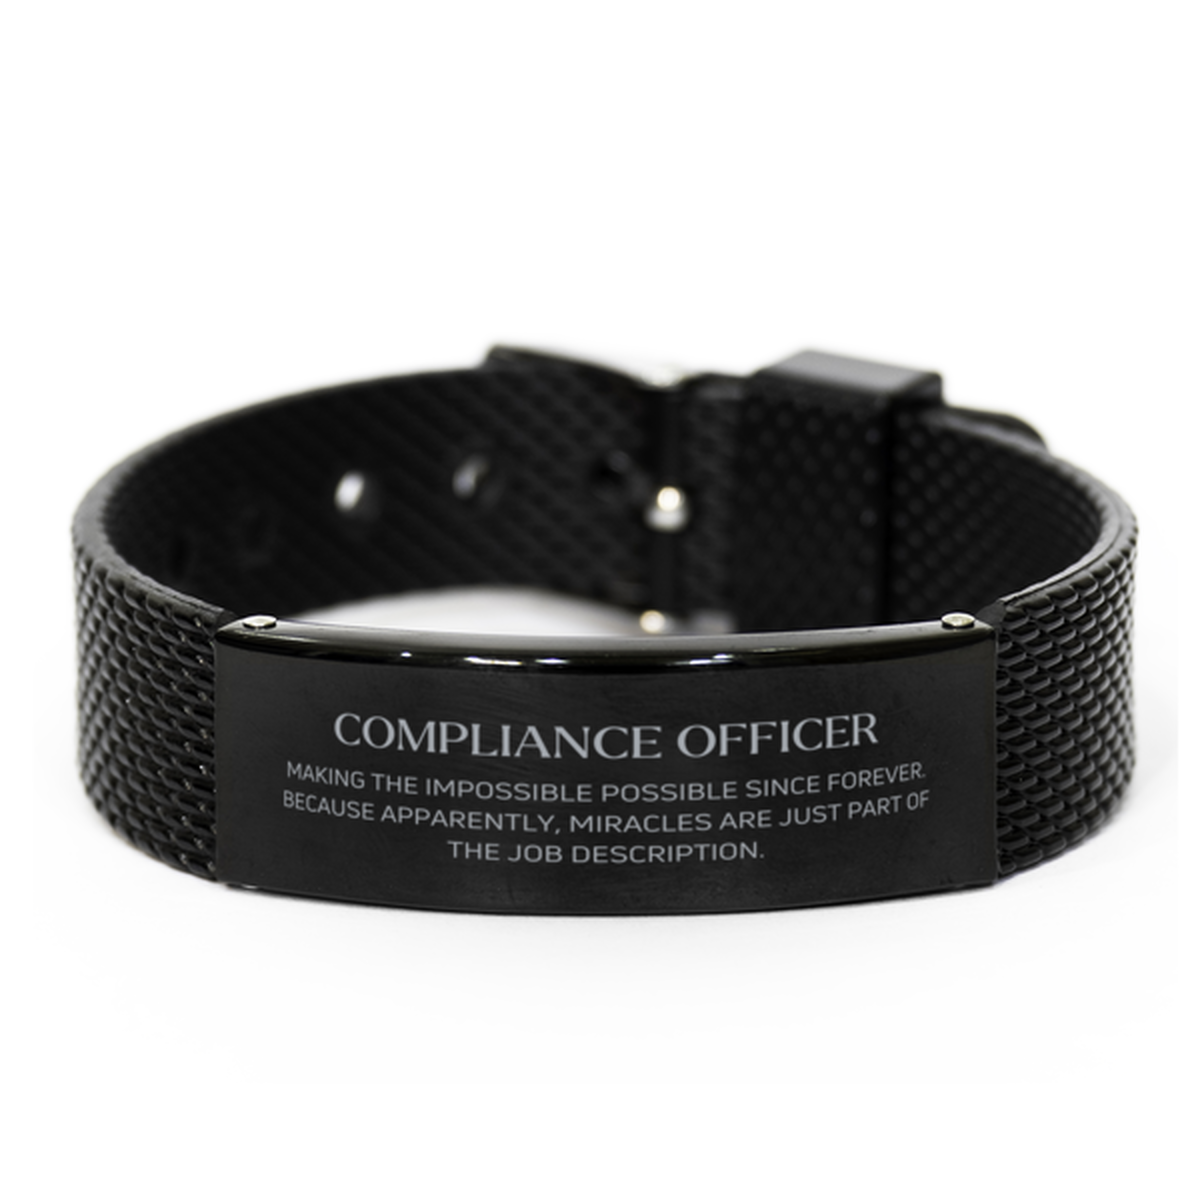 Funny Compliance Officer Gifts, Miracles are just part of the job description, Inspirational Birthday Black Shark Mesh Bracelet For Compliance Officer, Men, Women, Coworkers, Friends, Boss